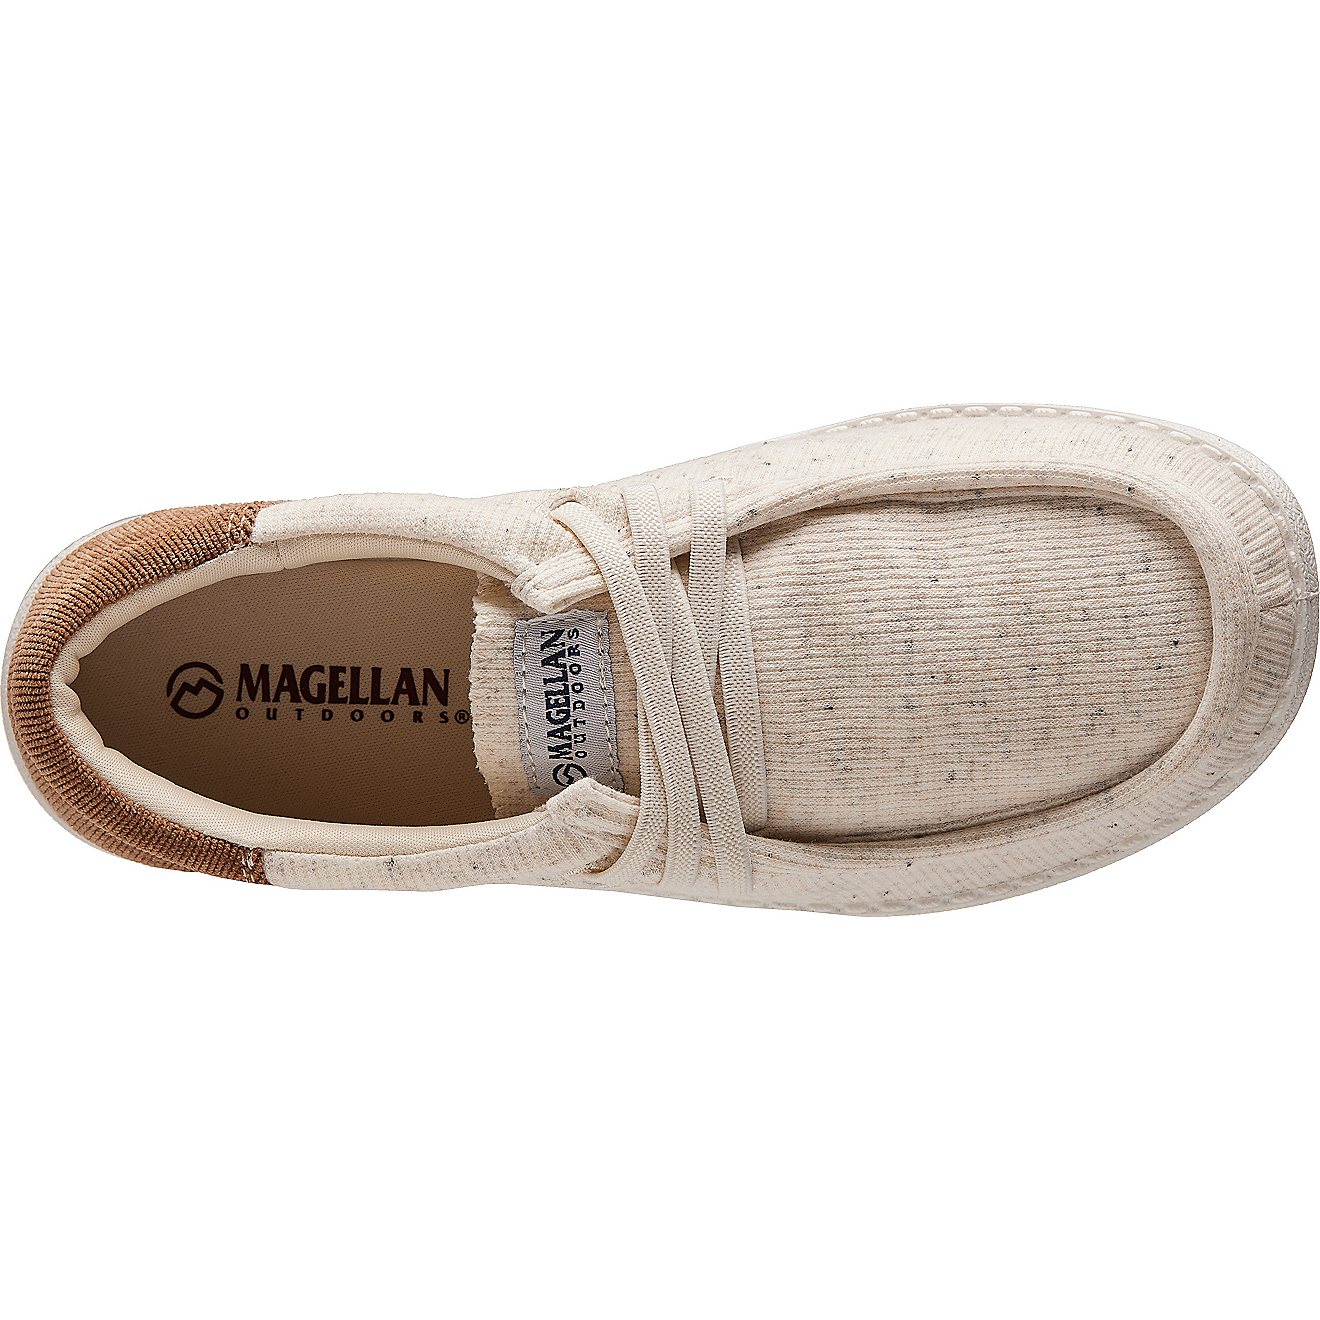 Magellan Outdoors Women’s Speckled Jersey Moc Toe Shoes                                                                        - view number 3